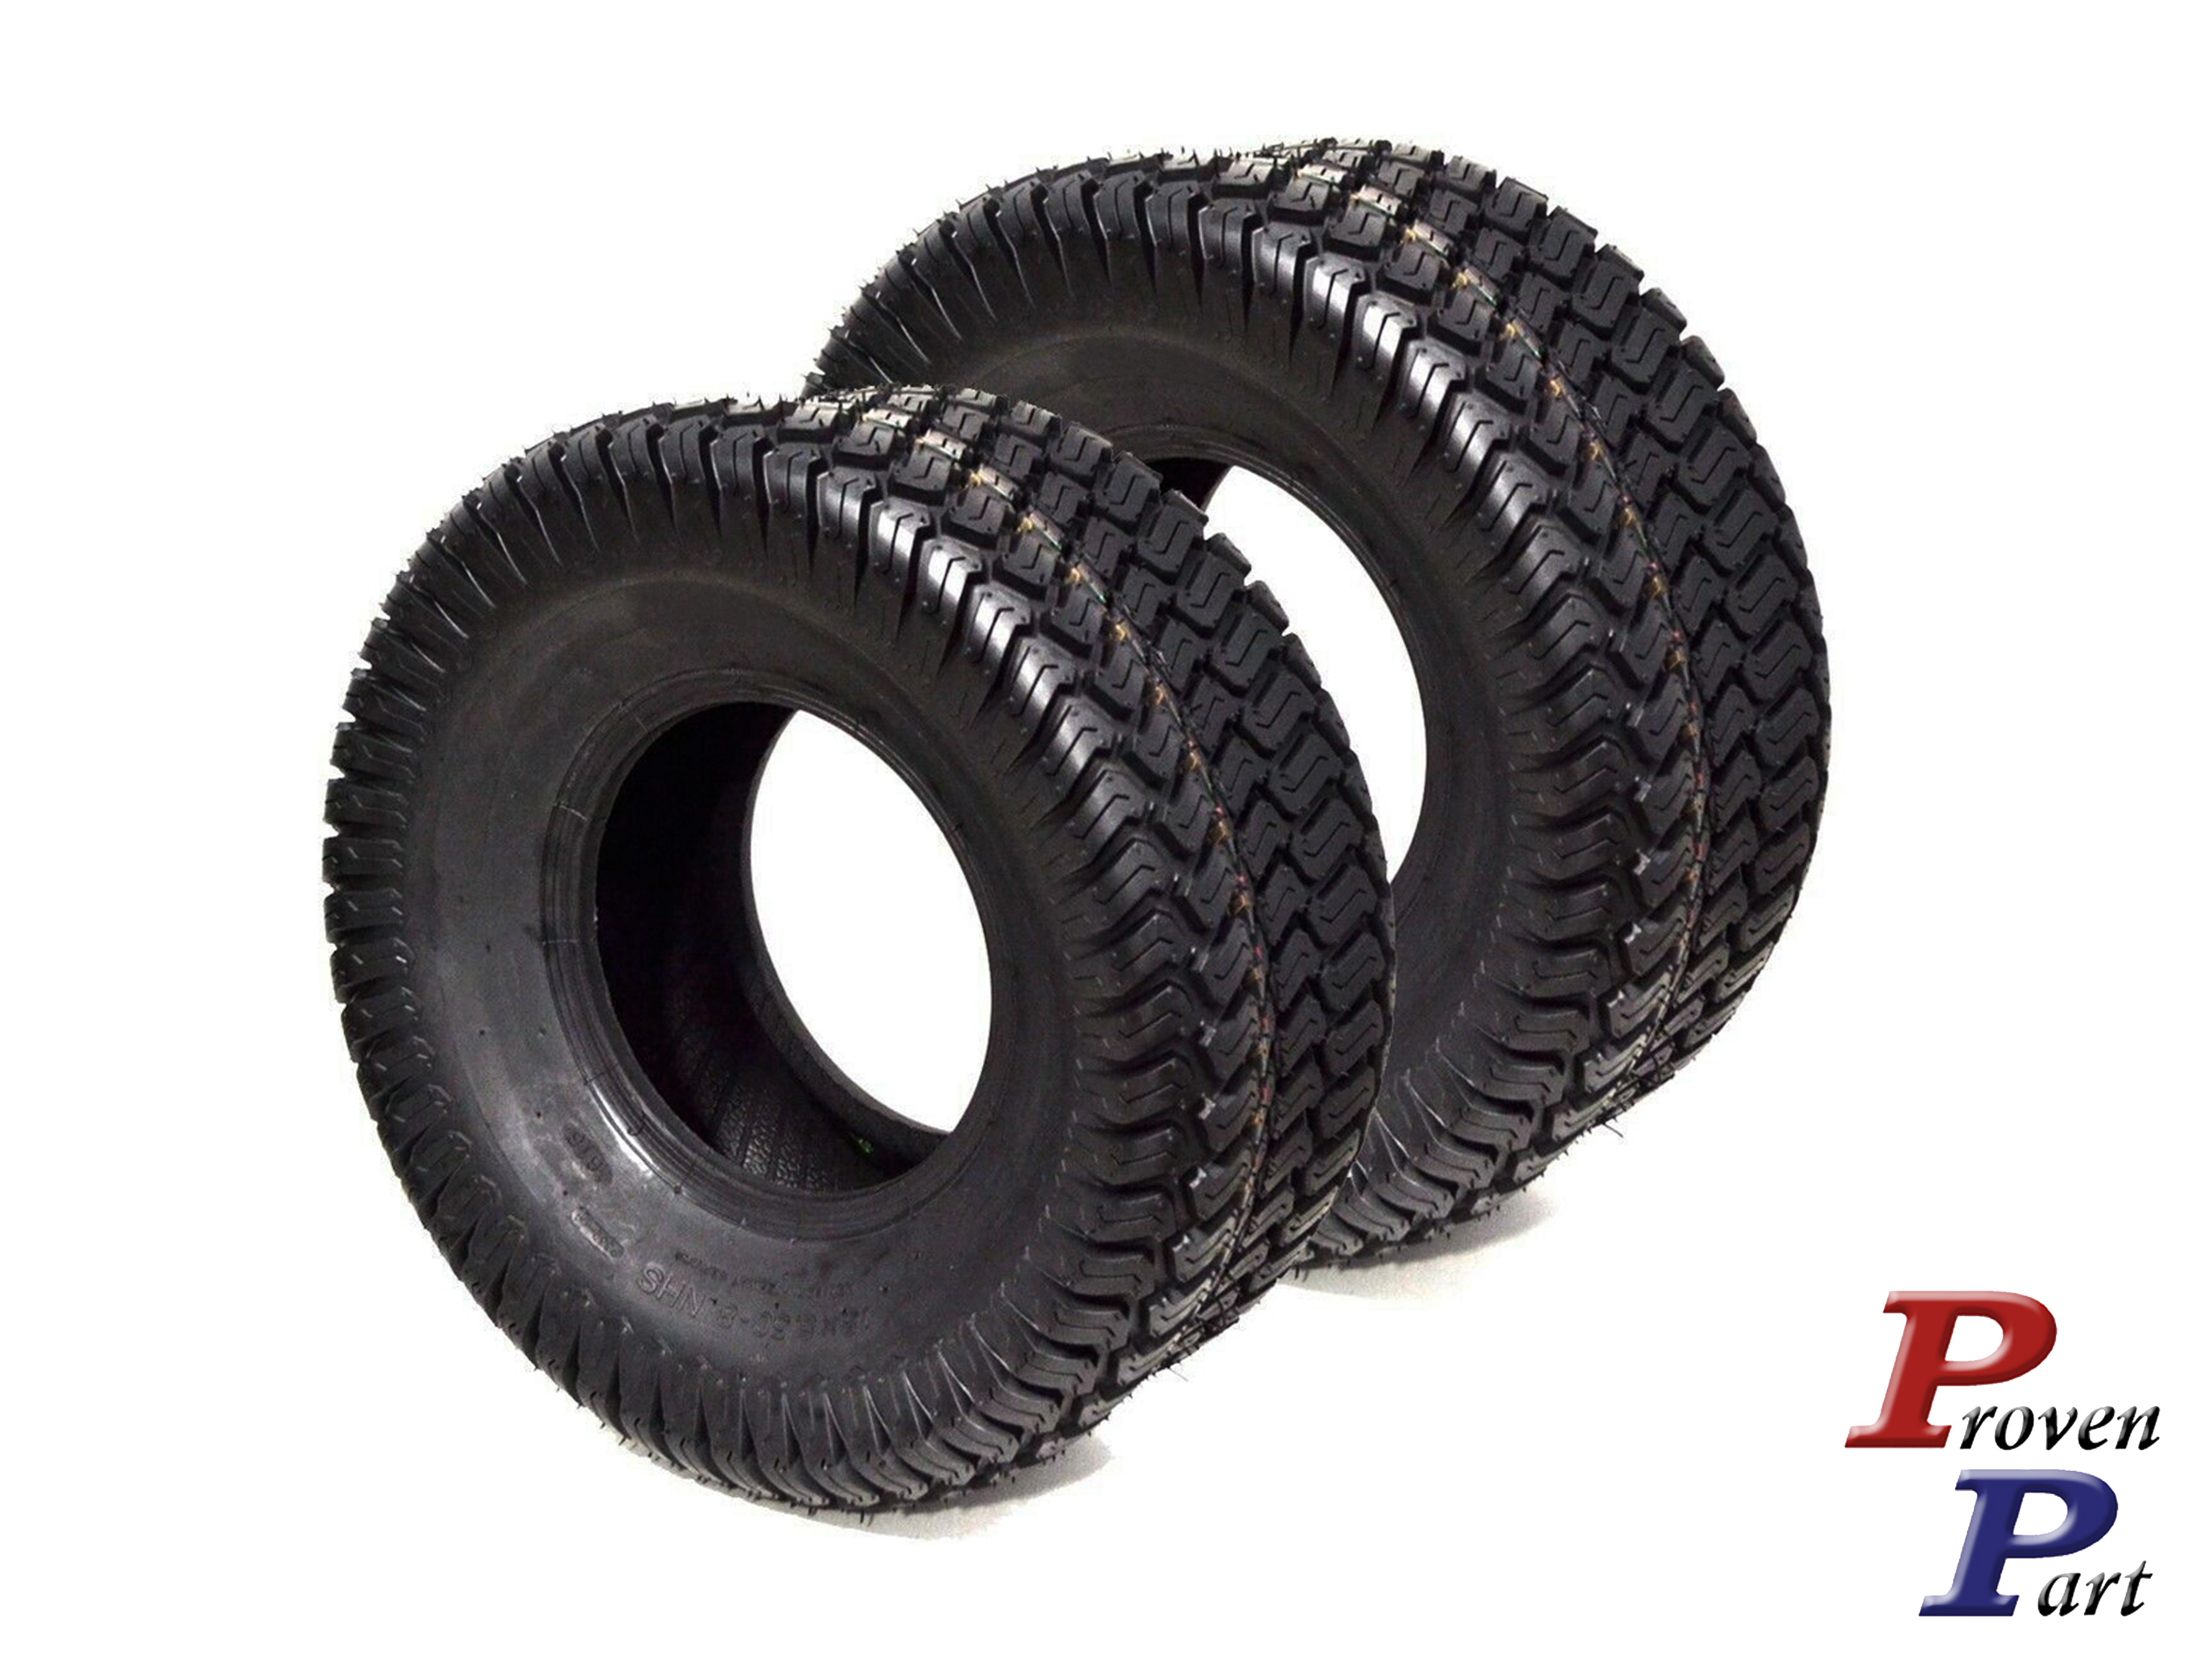 Set of 2 ProMaster 13X6.5-6 lawn mower tubeless tires 4 Ply - Click Image to Close